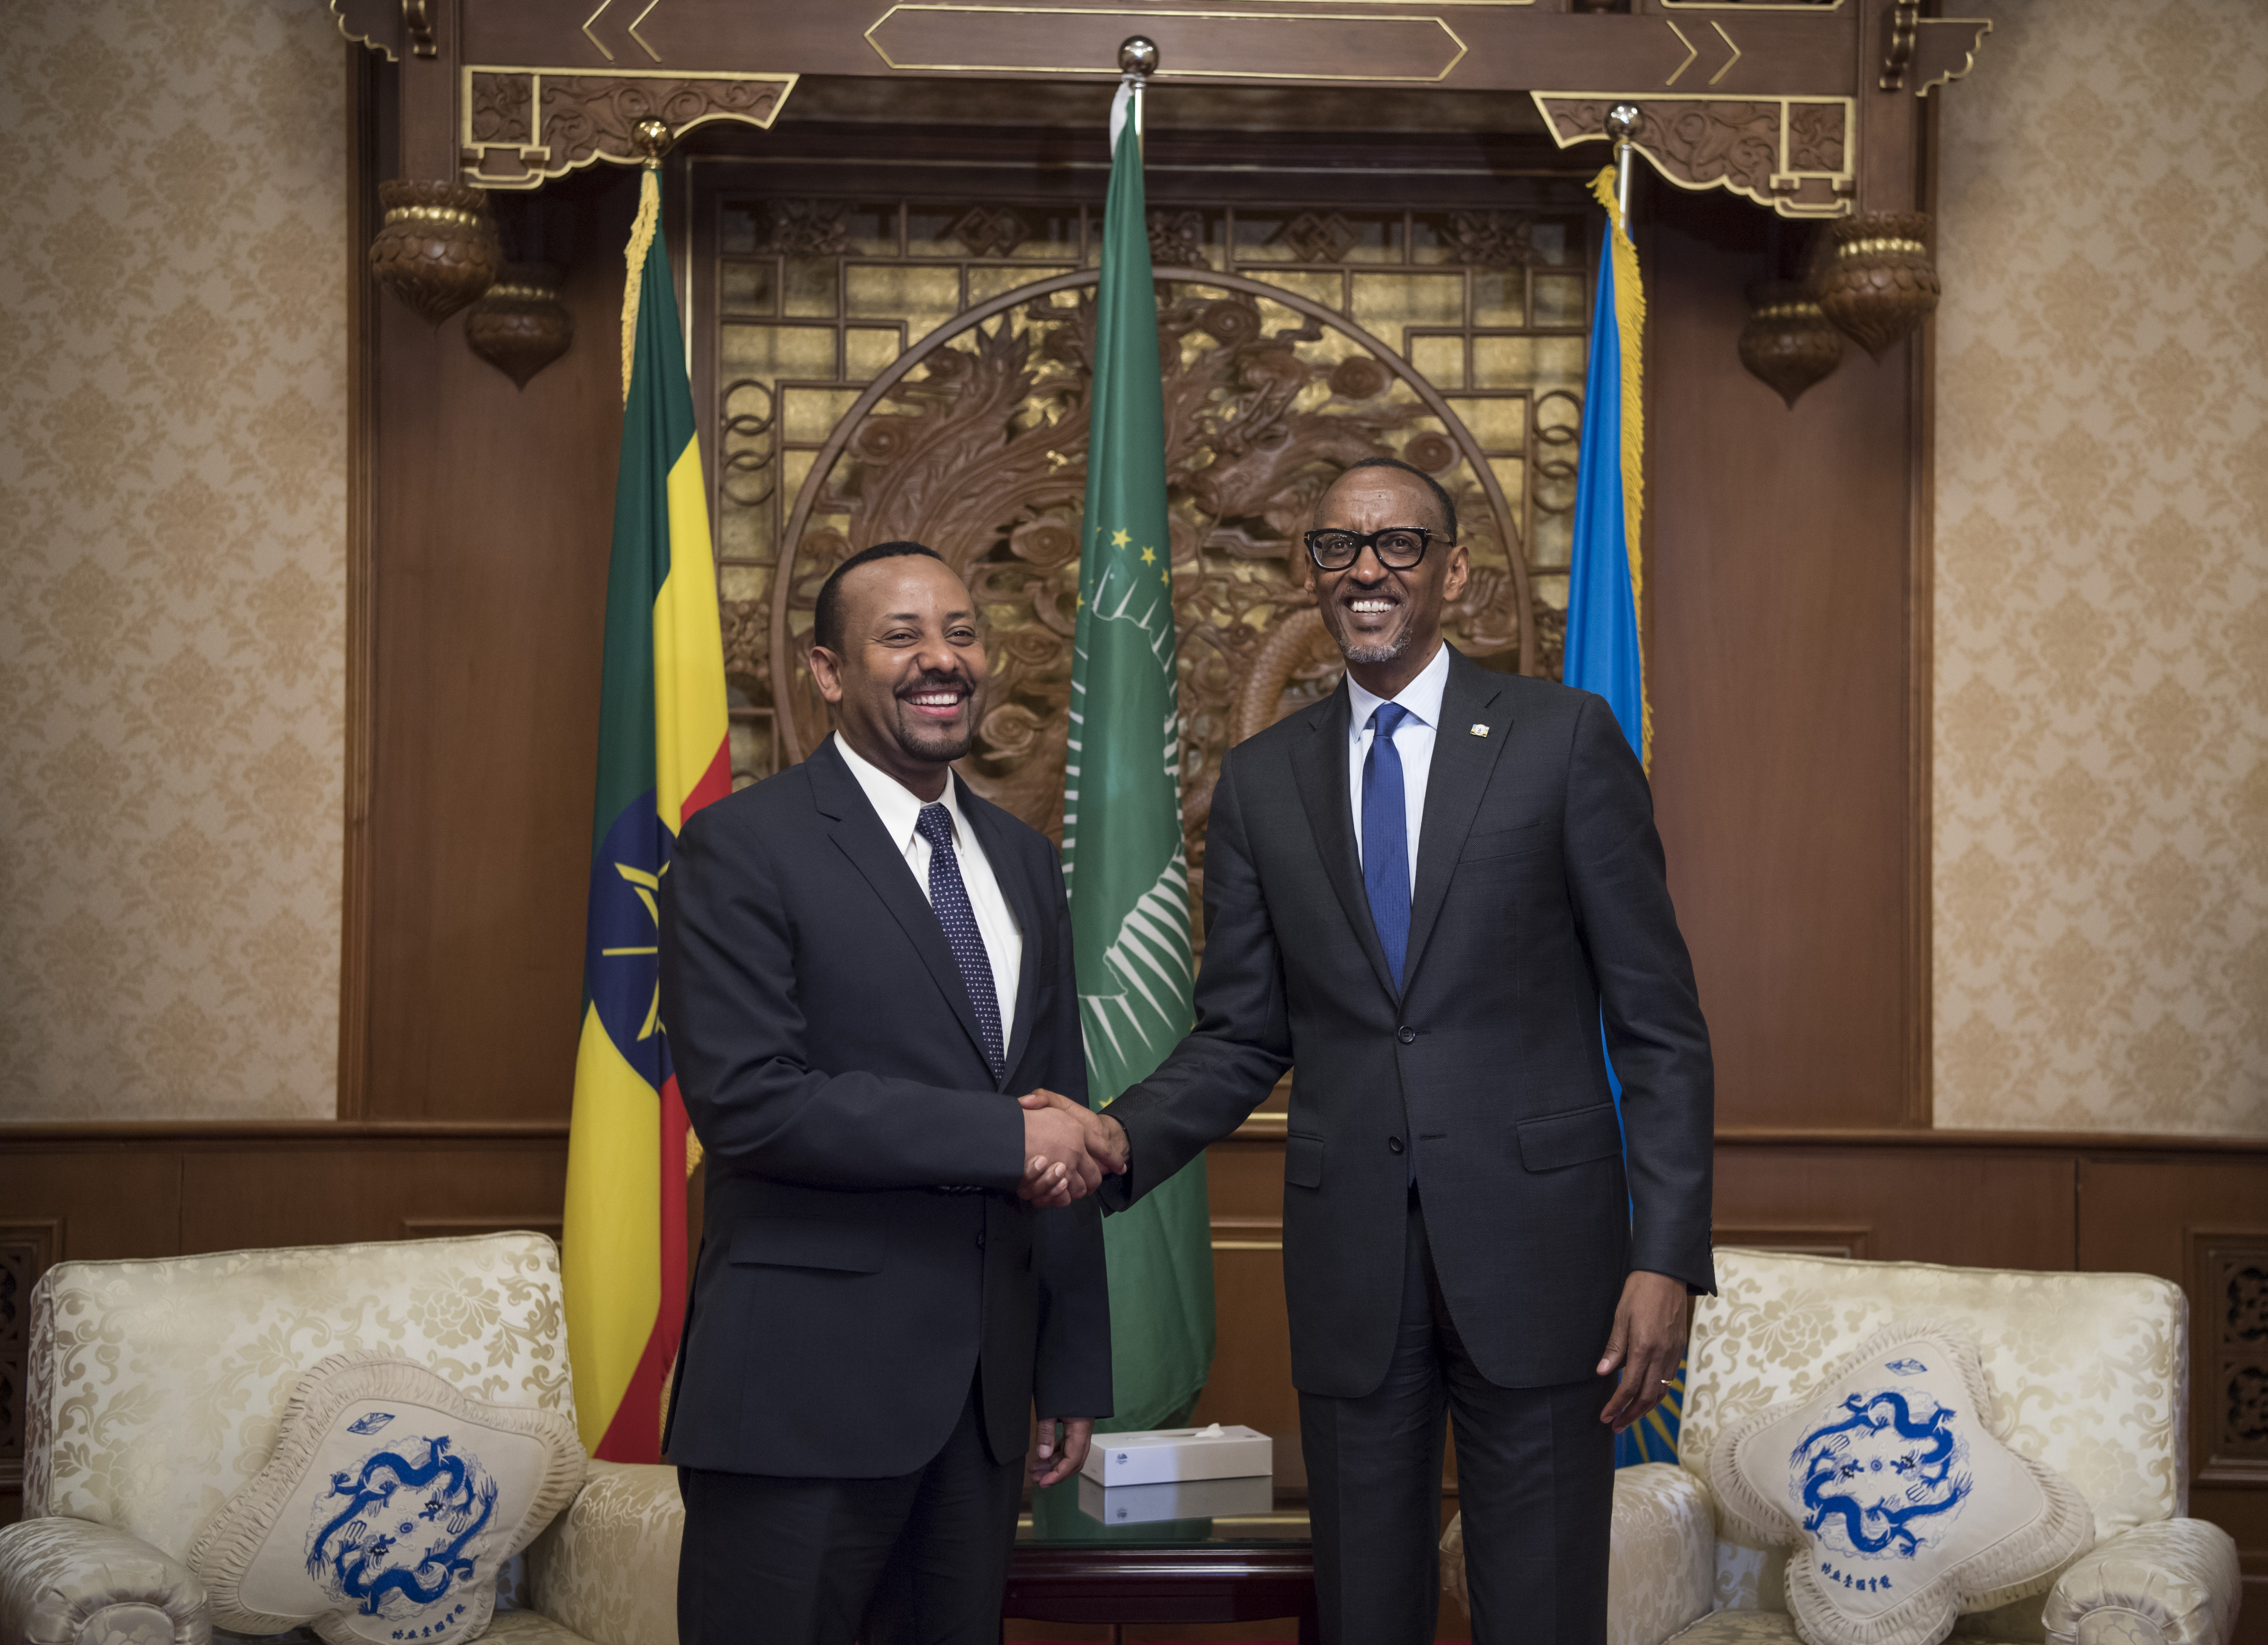 Prime Minister Abiy Ahmed of Ethiopia (photo credit: Paul Kagame/flickr)